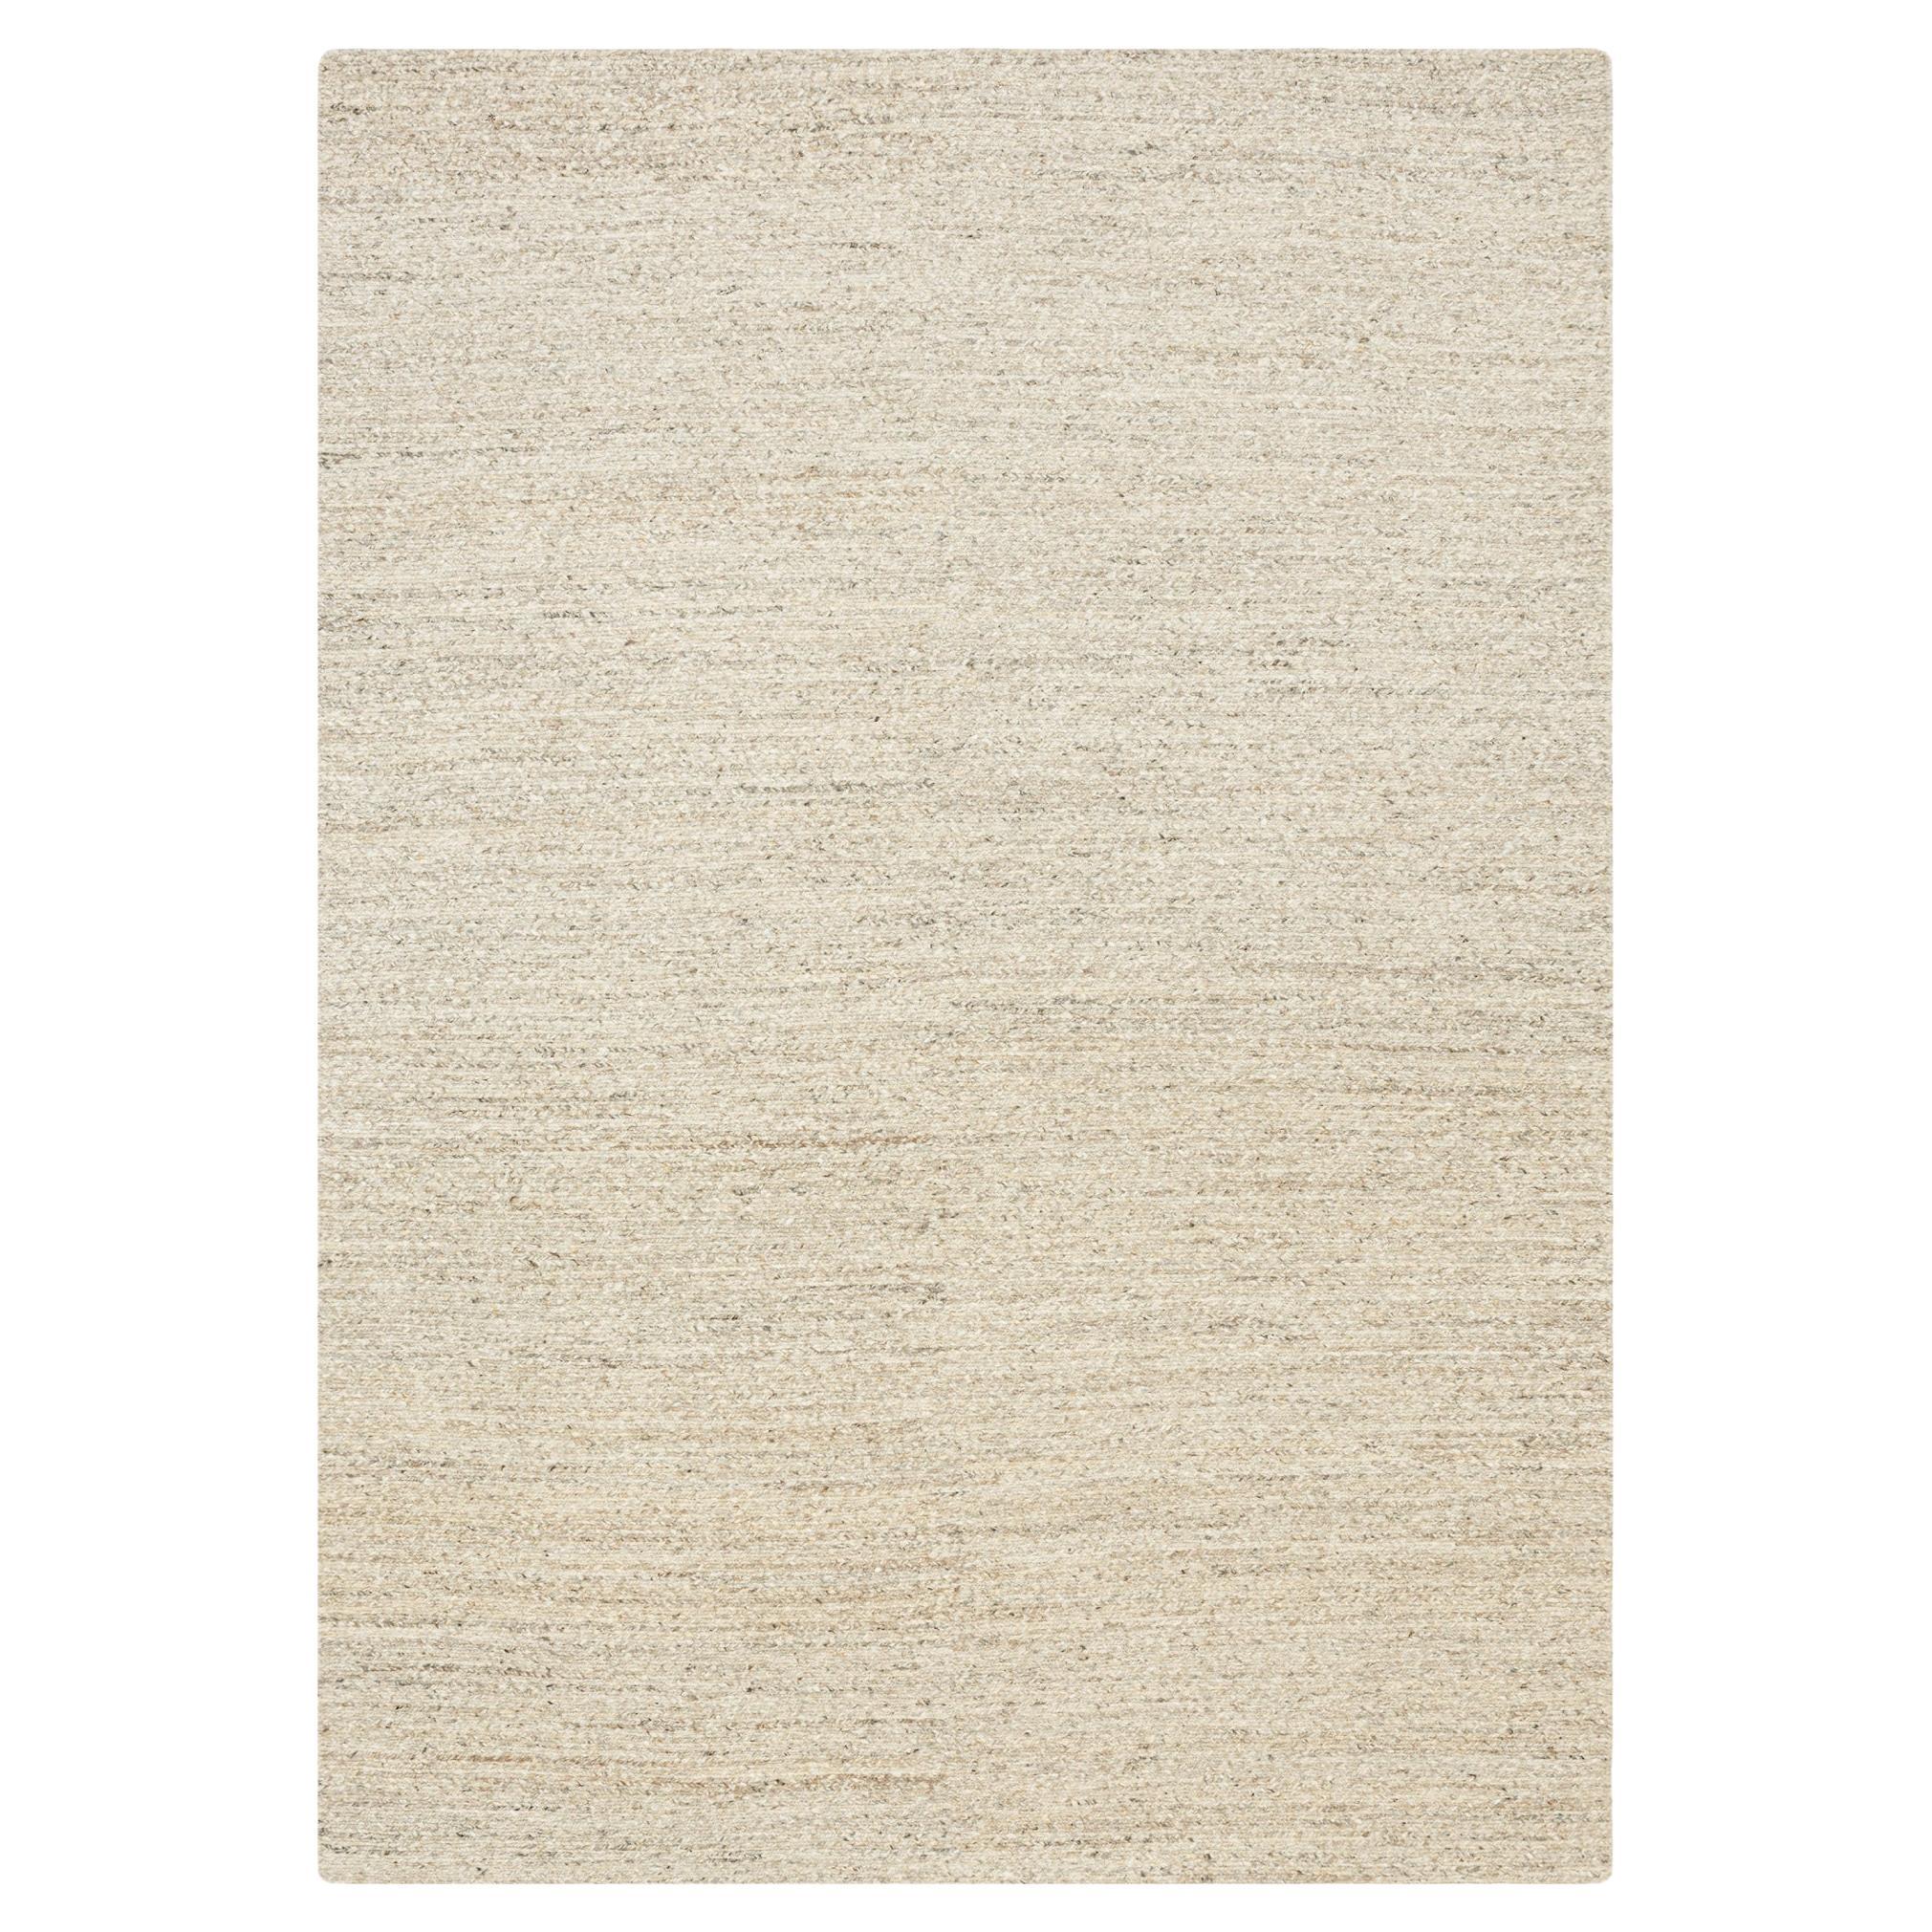 Chunky Sumac Natural Brown Flatweave Rug by Knots Rugs For Sale